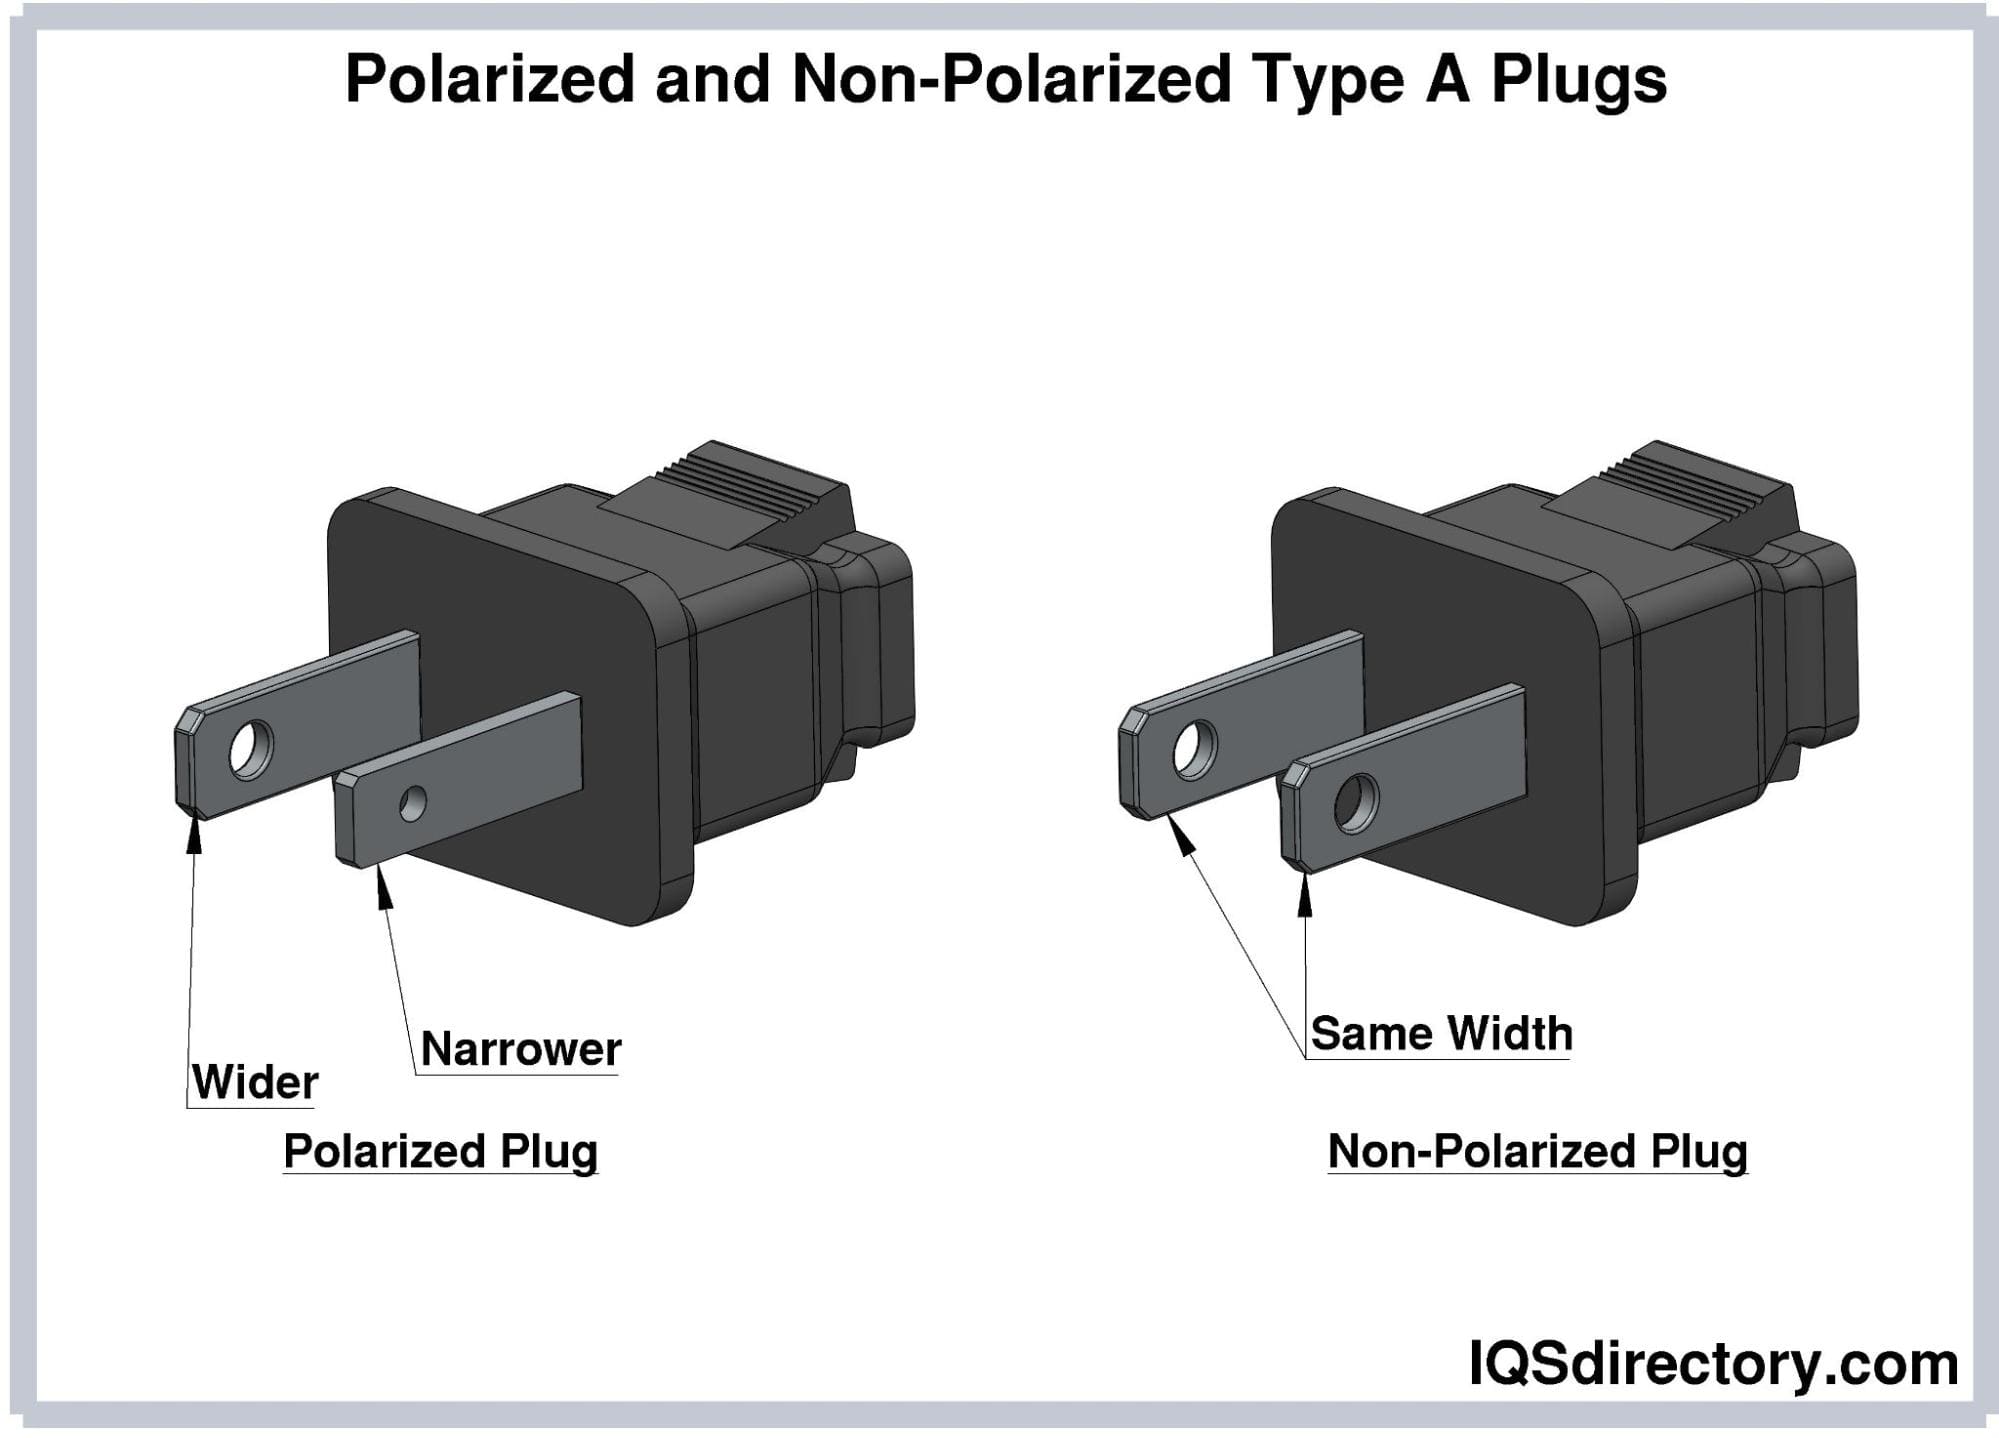 North American & Japanese Electric Plug Difference